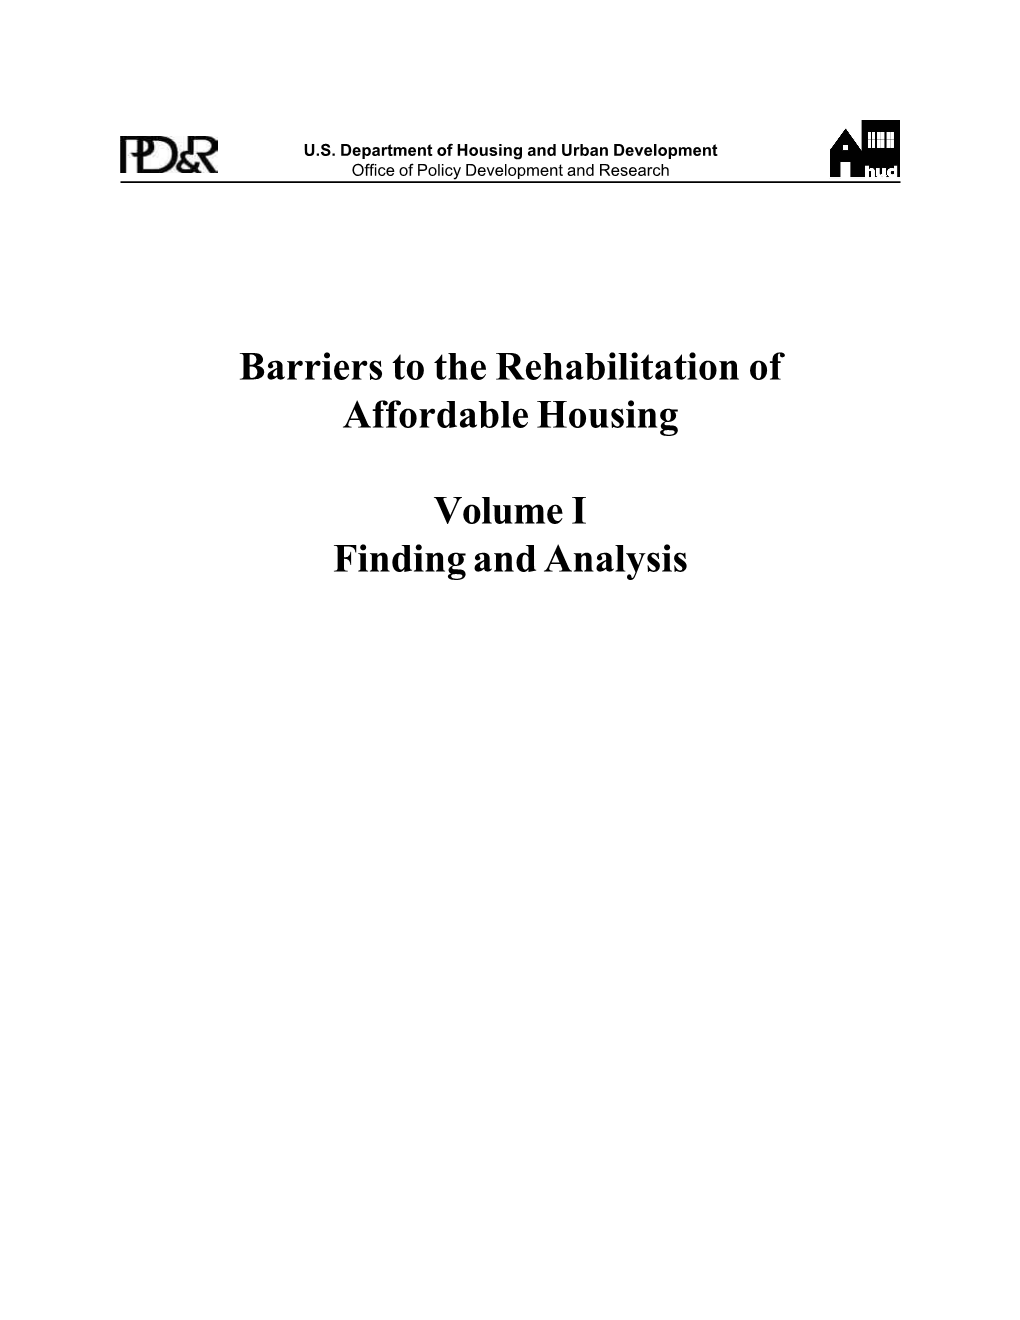 Barriers to the Rehabilitation of Affordable Housing-Volume 1